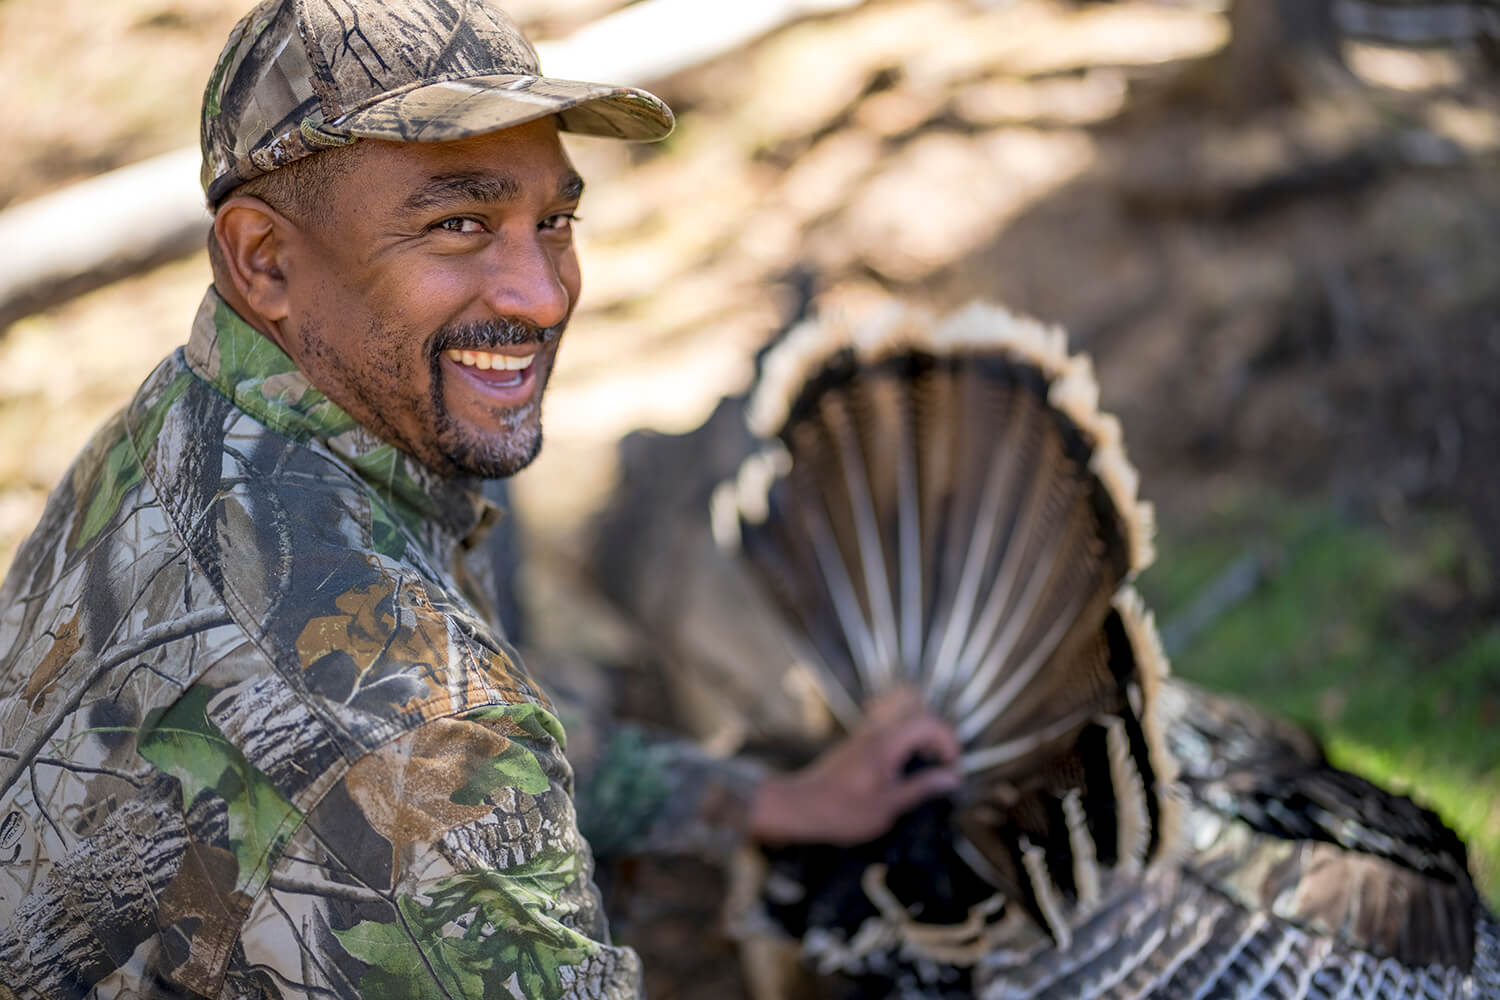 Hunter poses with turkey after hunt